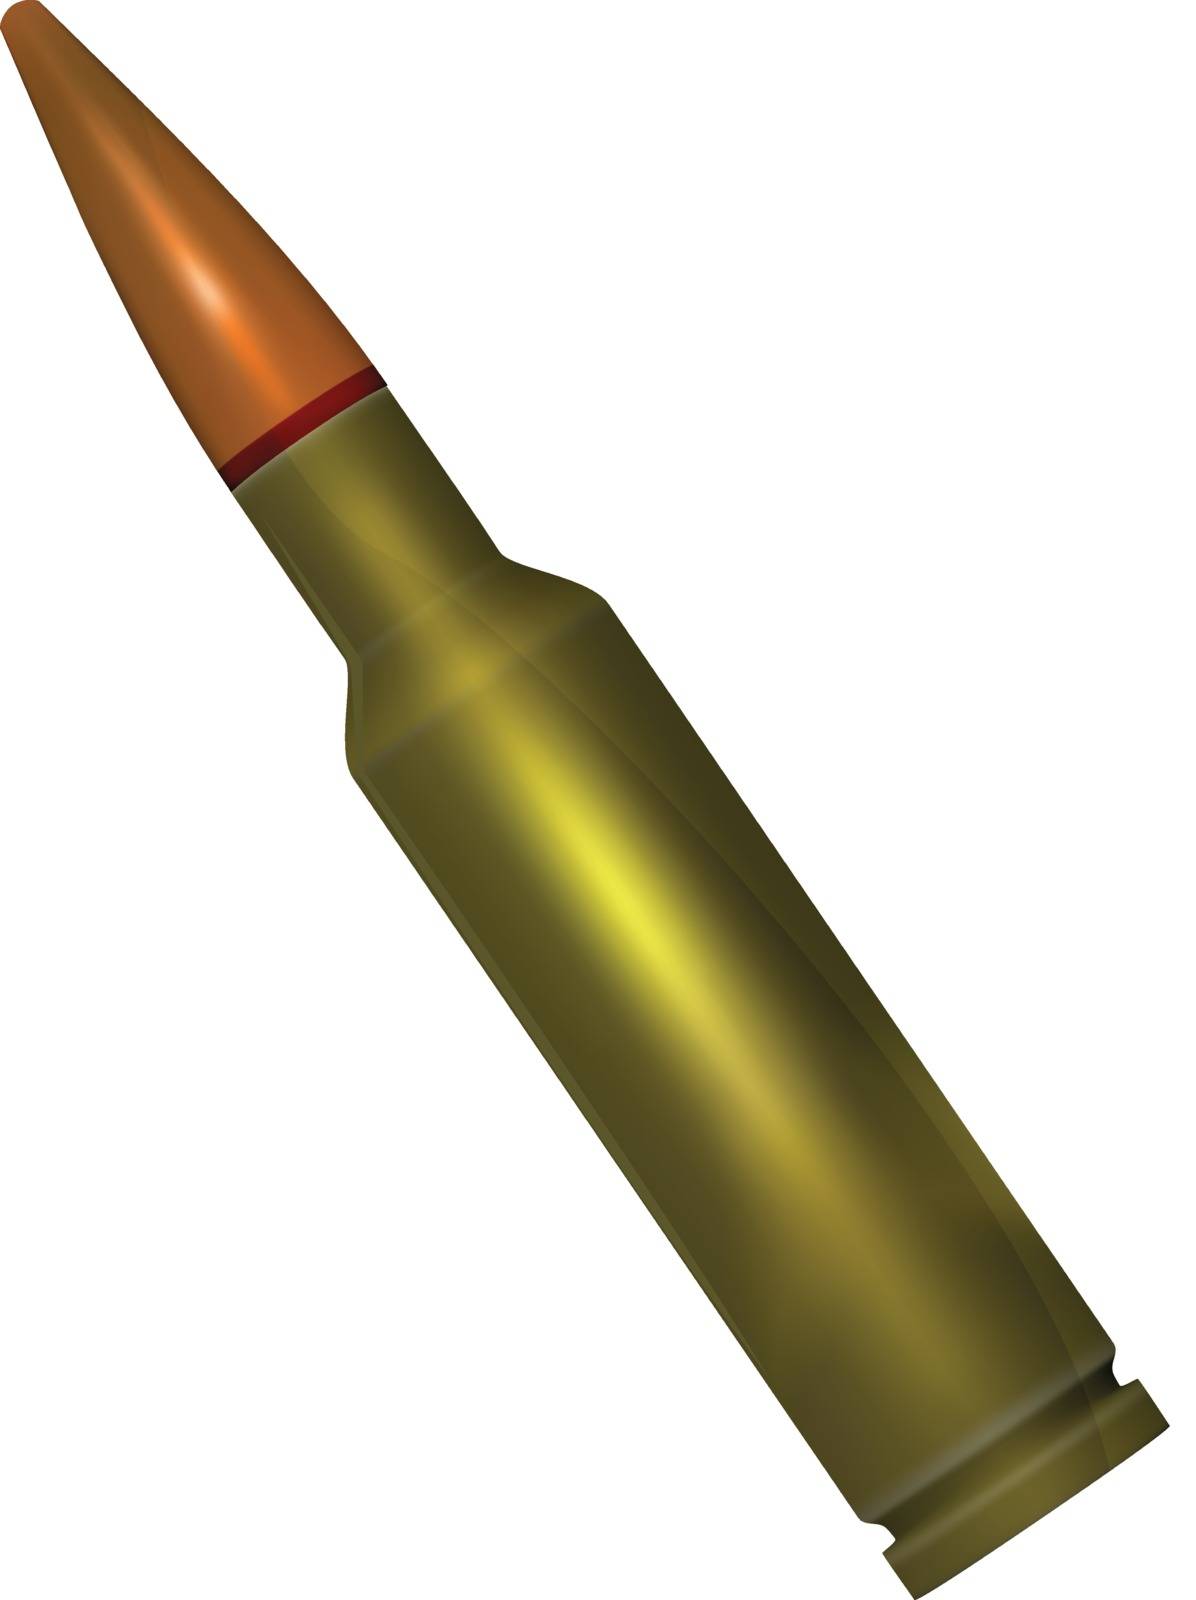 ammunition with a bullet for the weapon by nikolaich